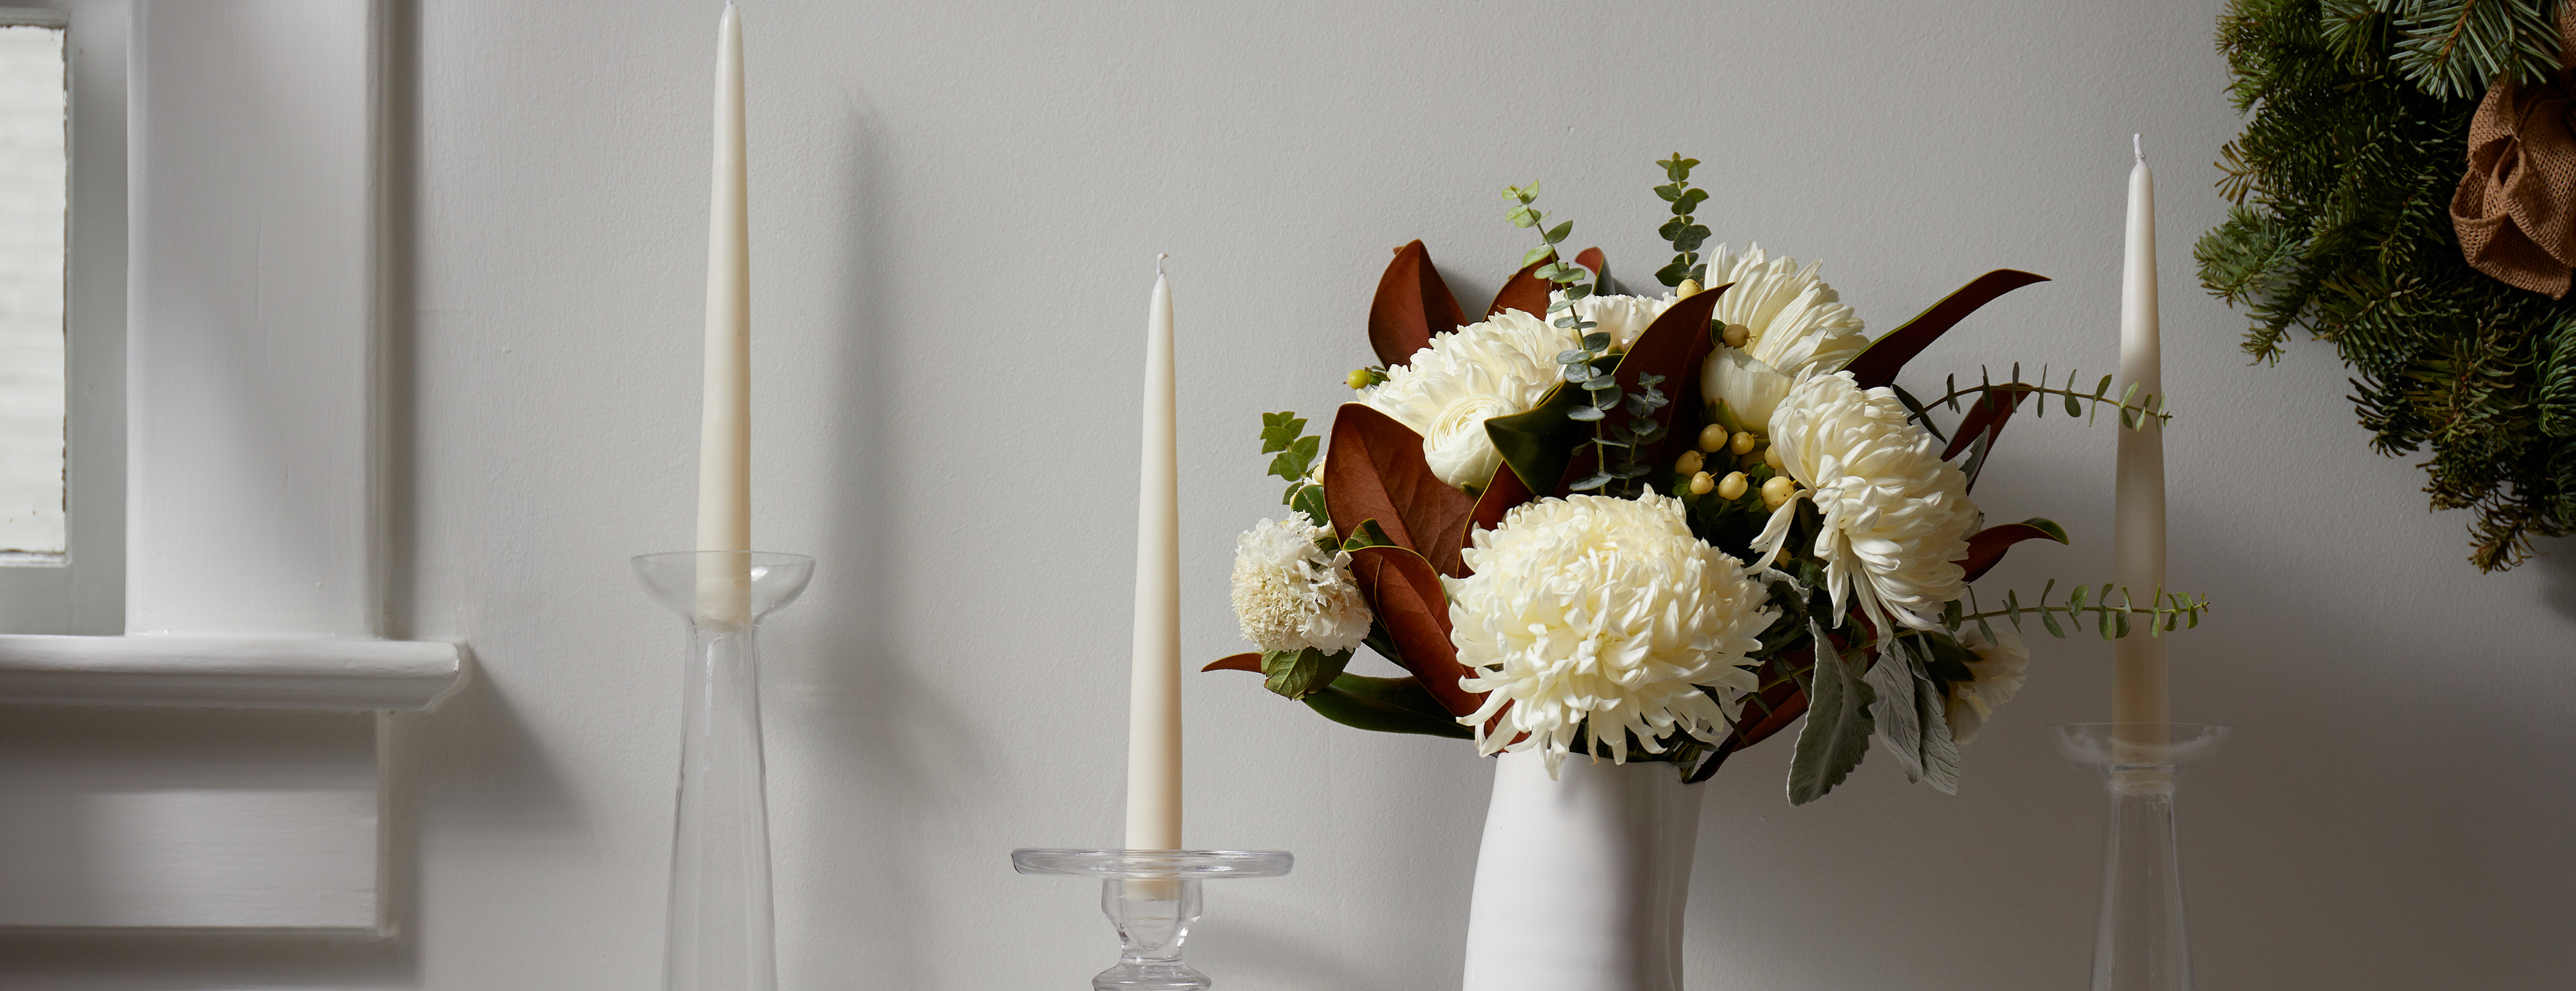 Arrangement with magnolia leaves and tapered candles